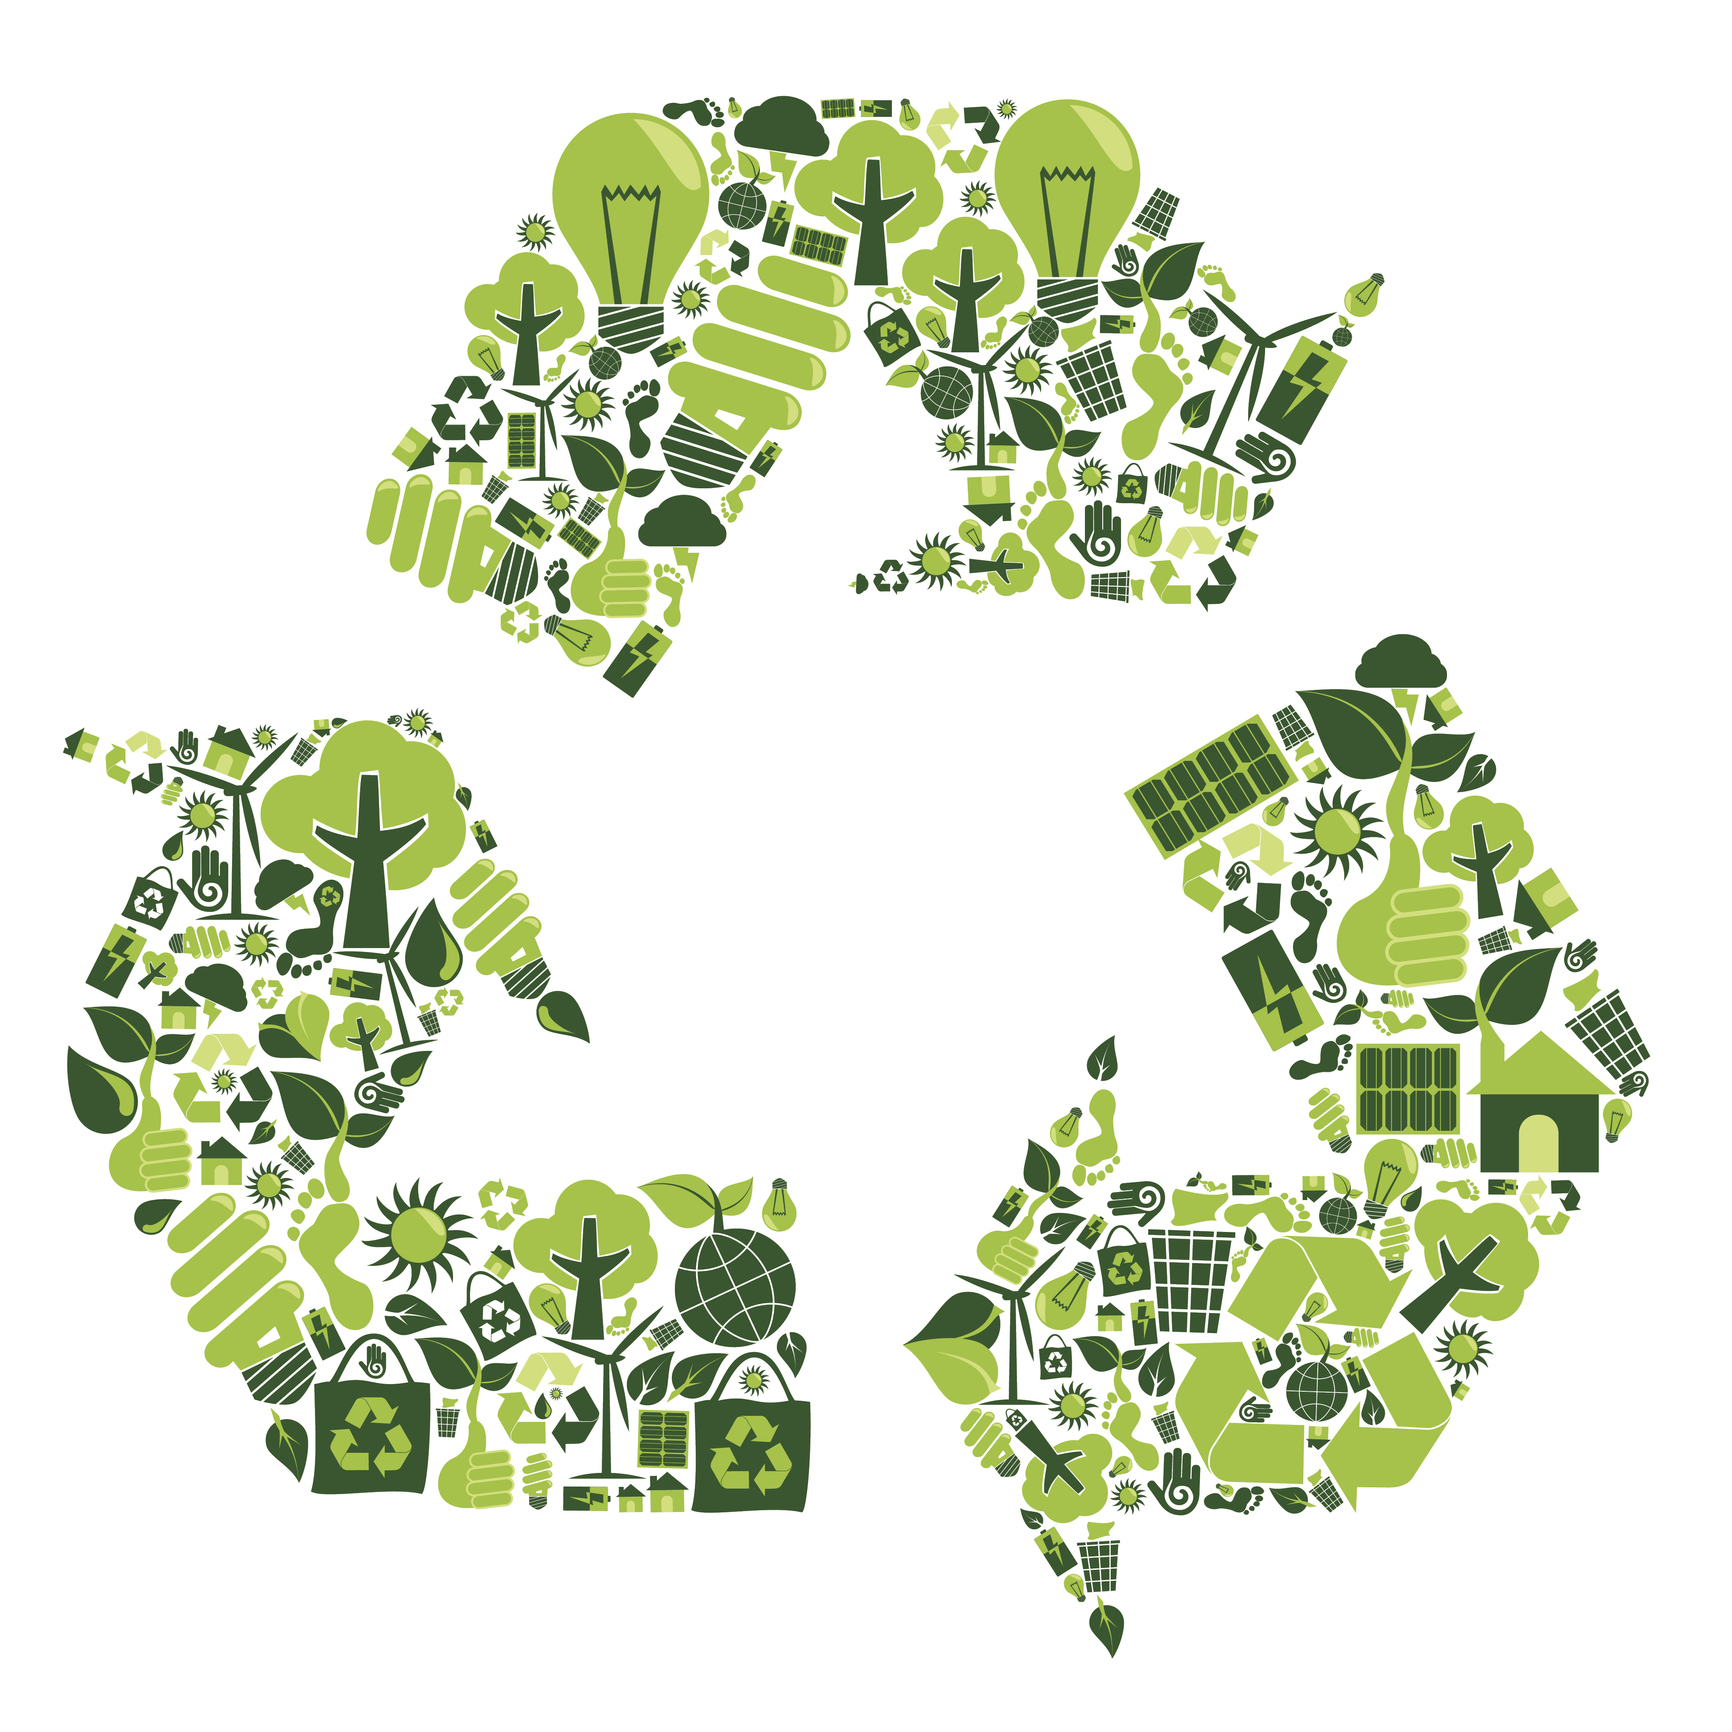 Green recycling symbol made of icons representing sustainability.